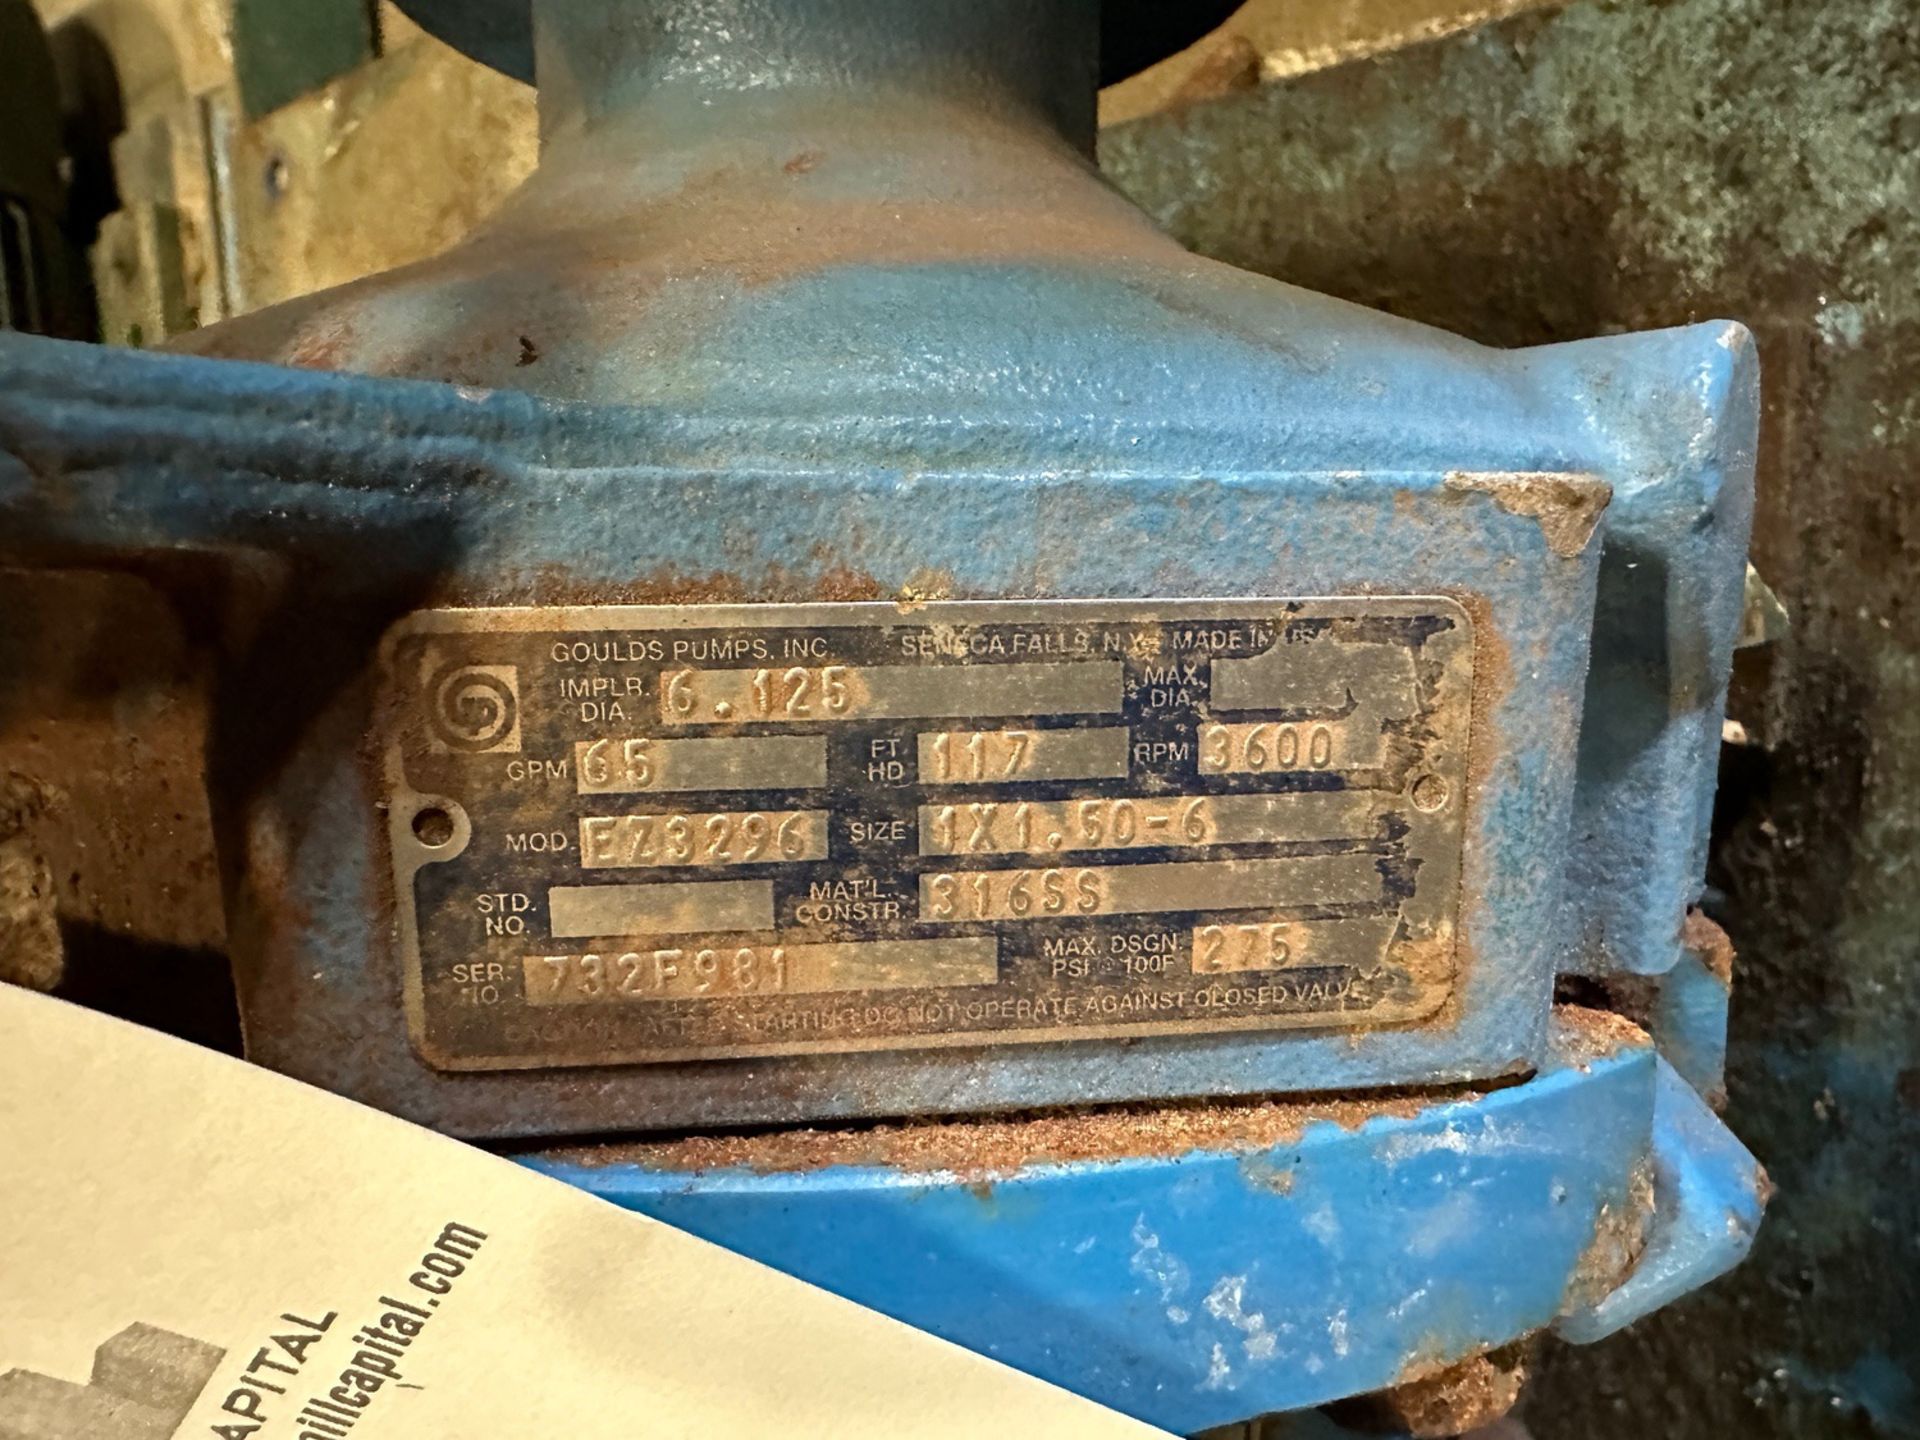 Toshiba 7.5 HP Severe Duty EQP Global Industrial Motor with Goulds Model | Rig Fee $25 - Image 4 of 4